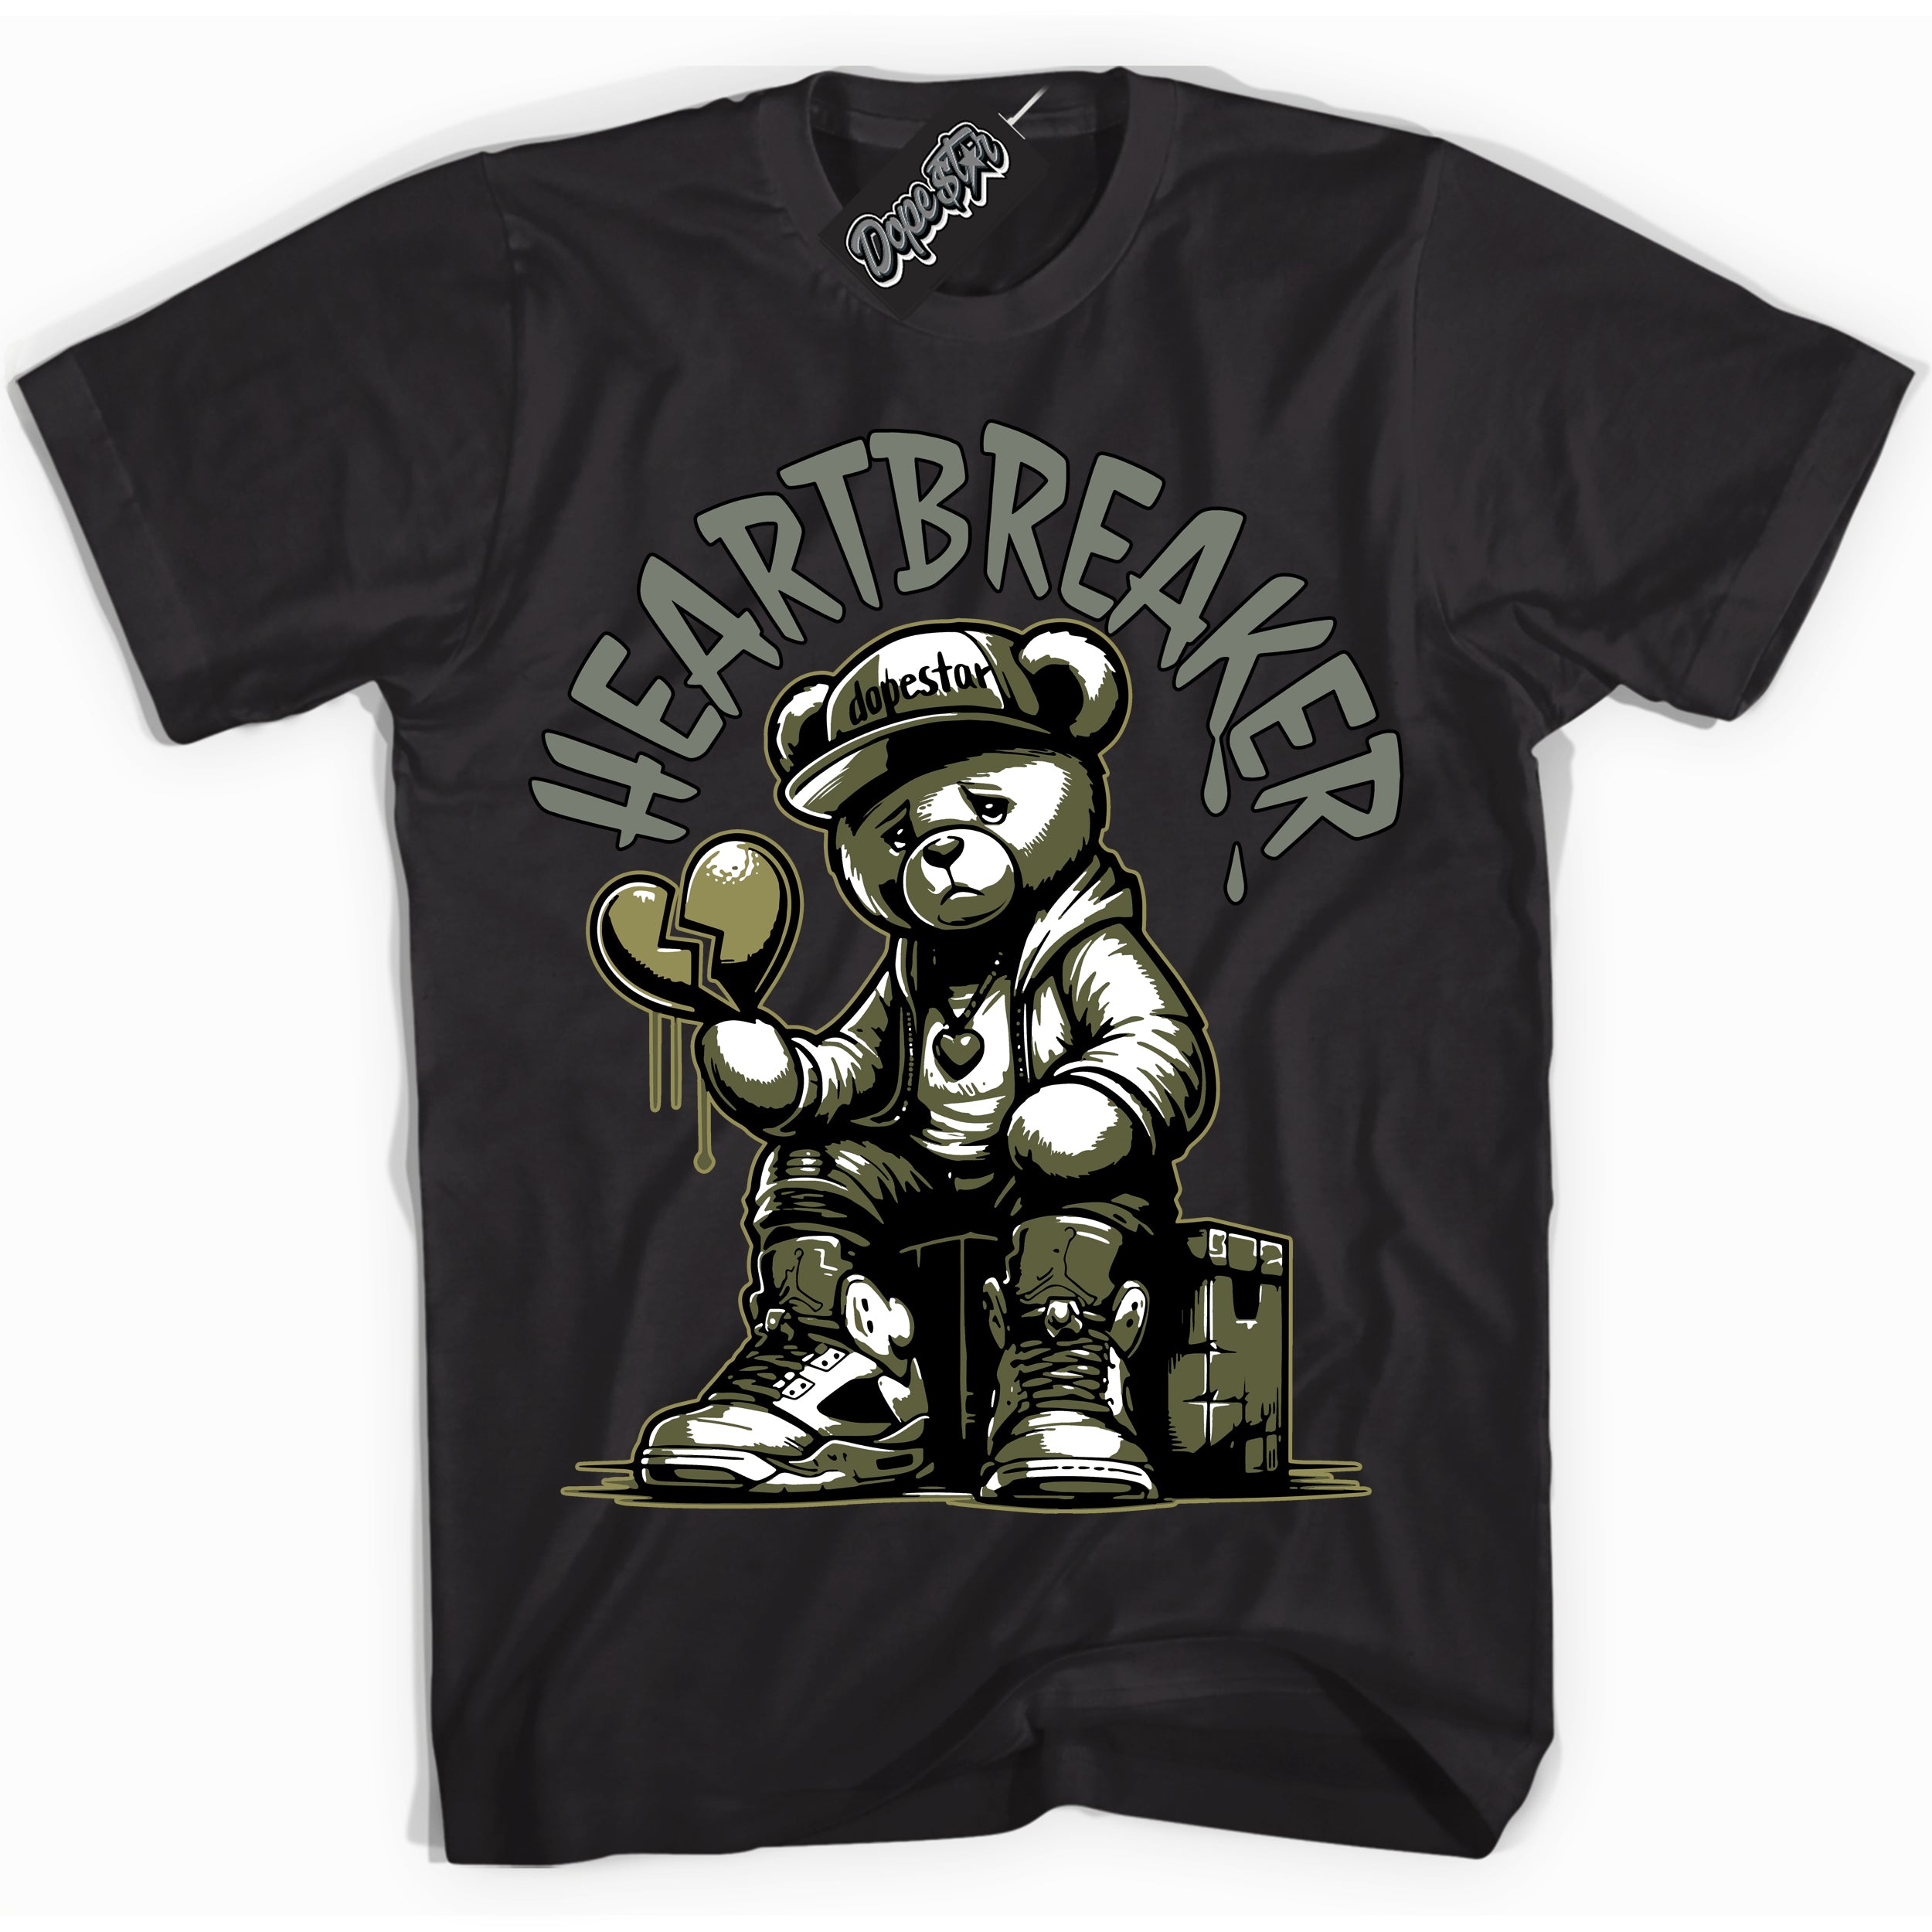 Cool Black graphic tee with “ Heartbreaker Bear ” print, that perfectly matches Craft Olive 4s sneakers